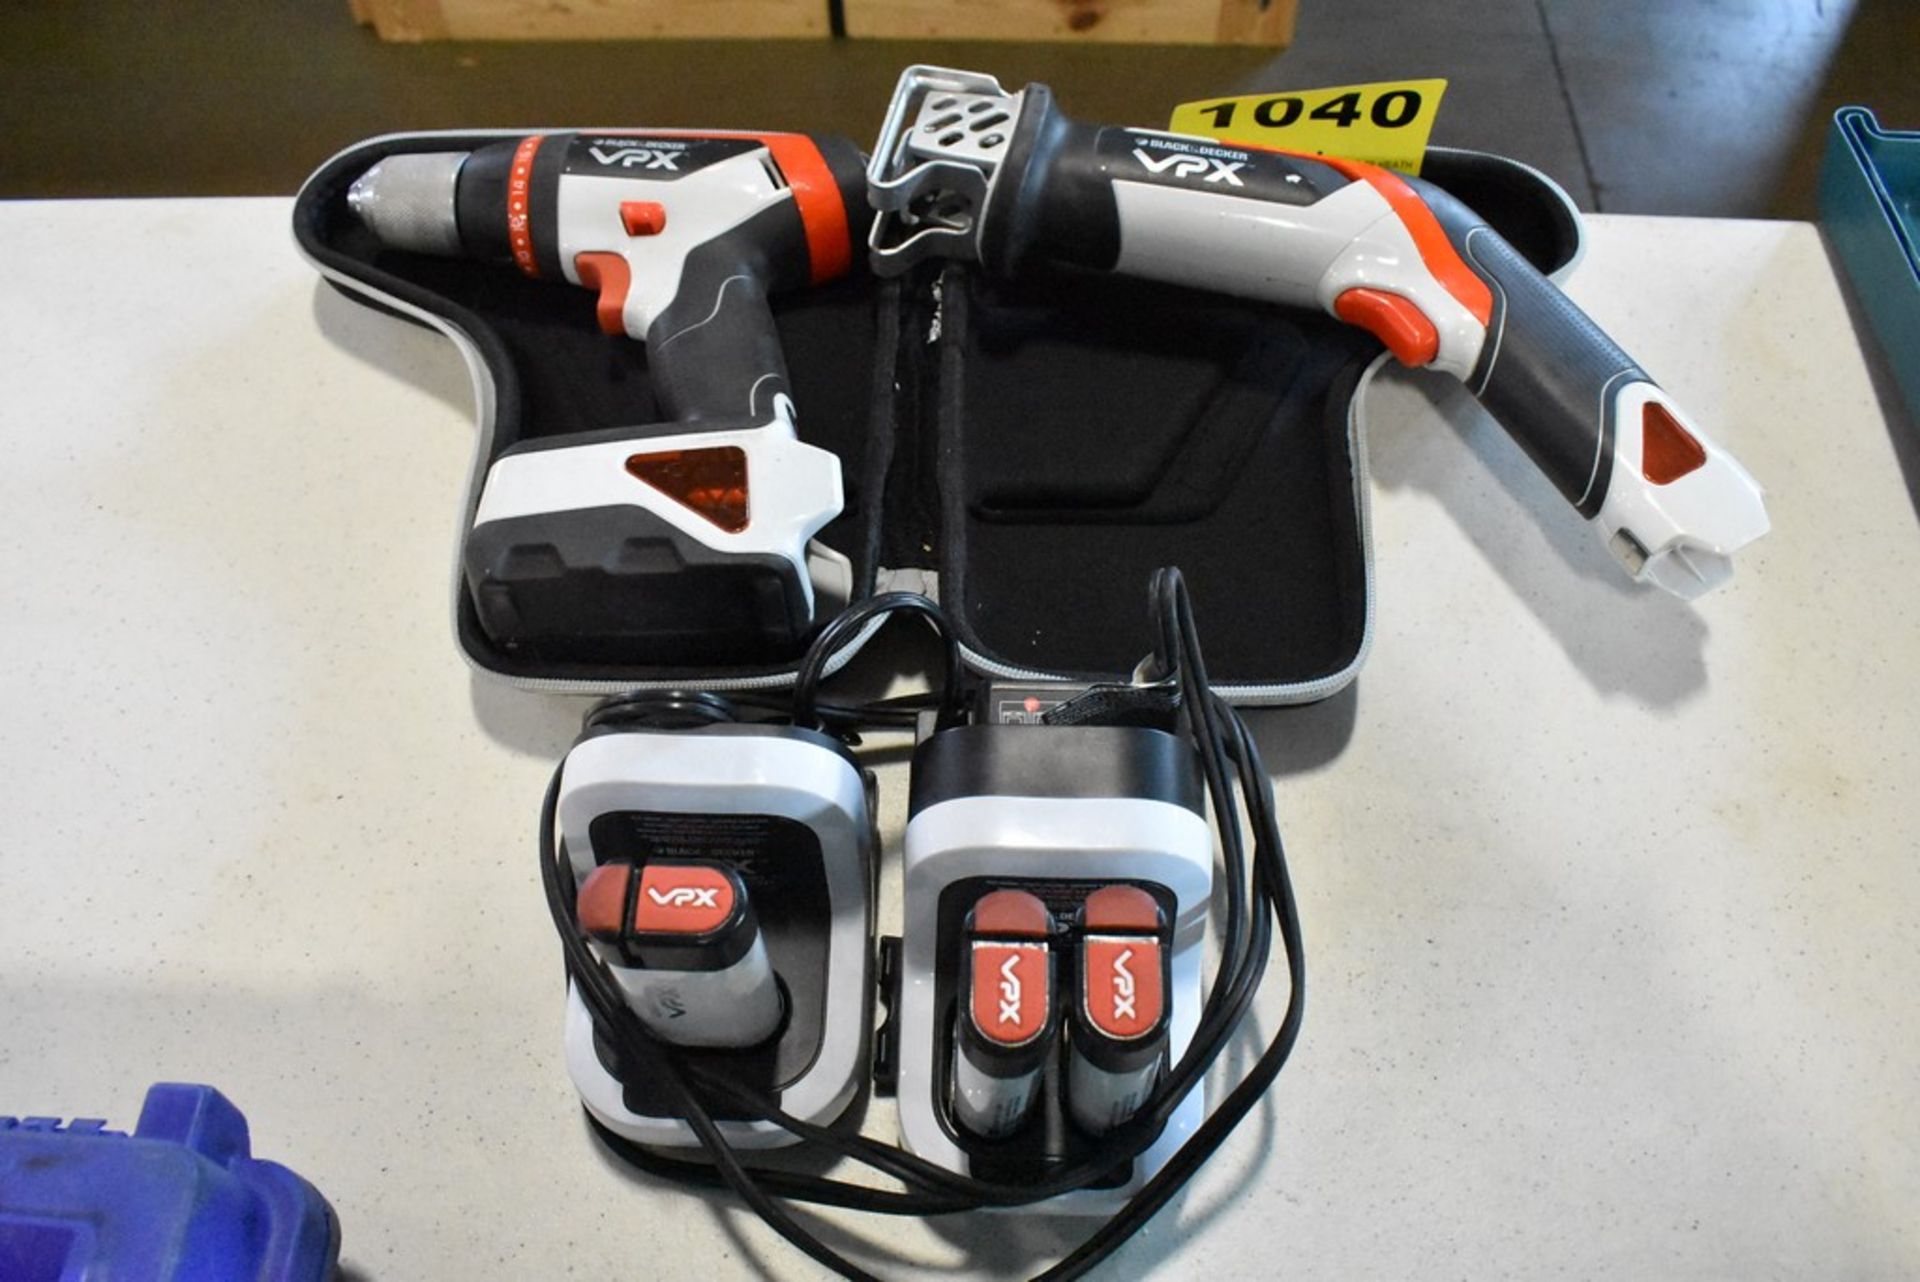 BLACK & DECKER MODEL VPX301, VPX1212 CORDLESS DRILL DRIVER WITH BATTERIES & CHARGERS